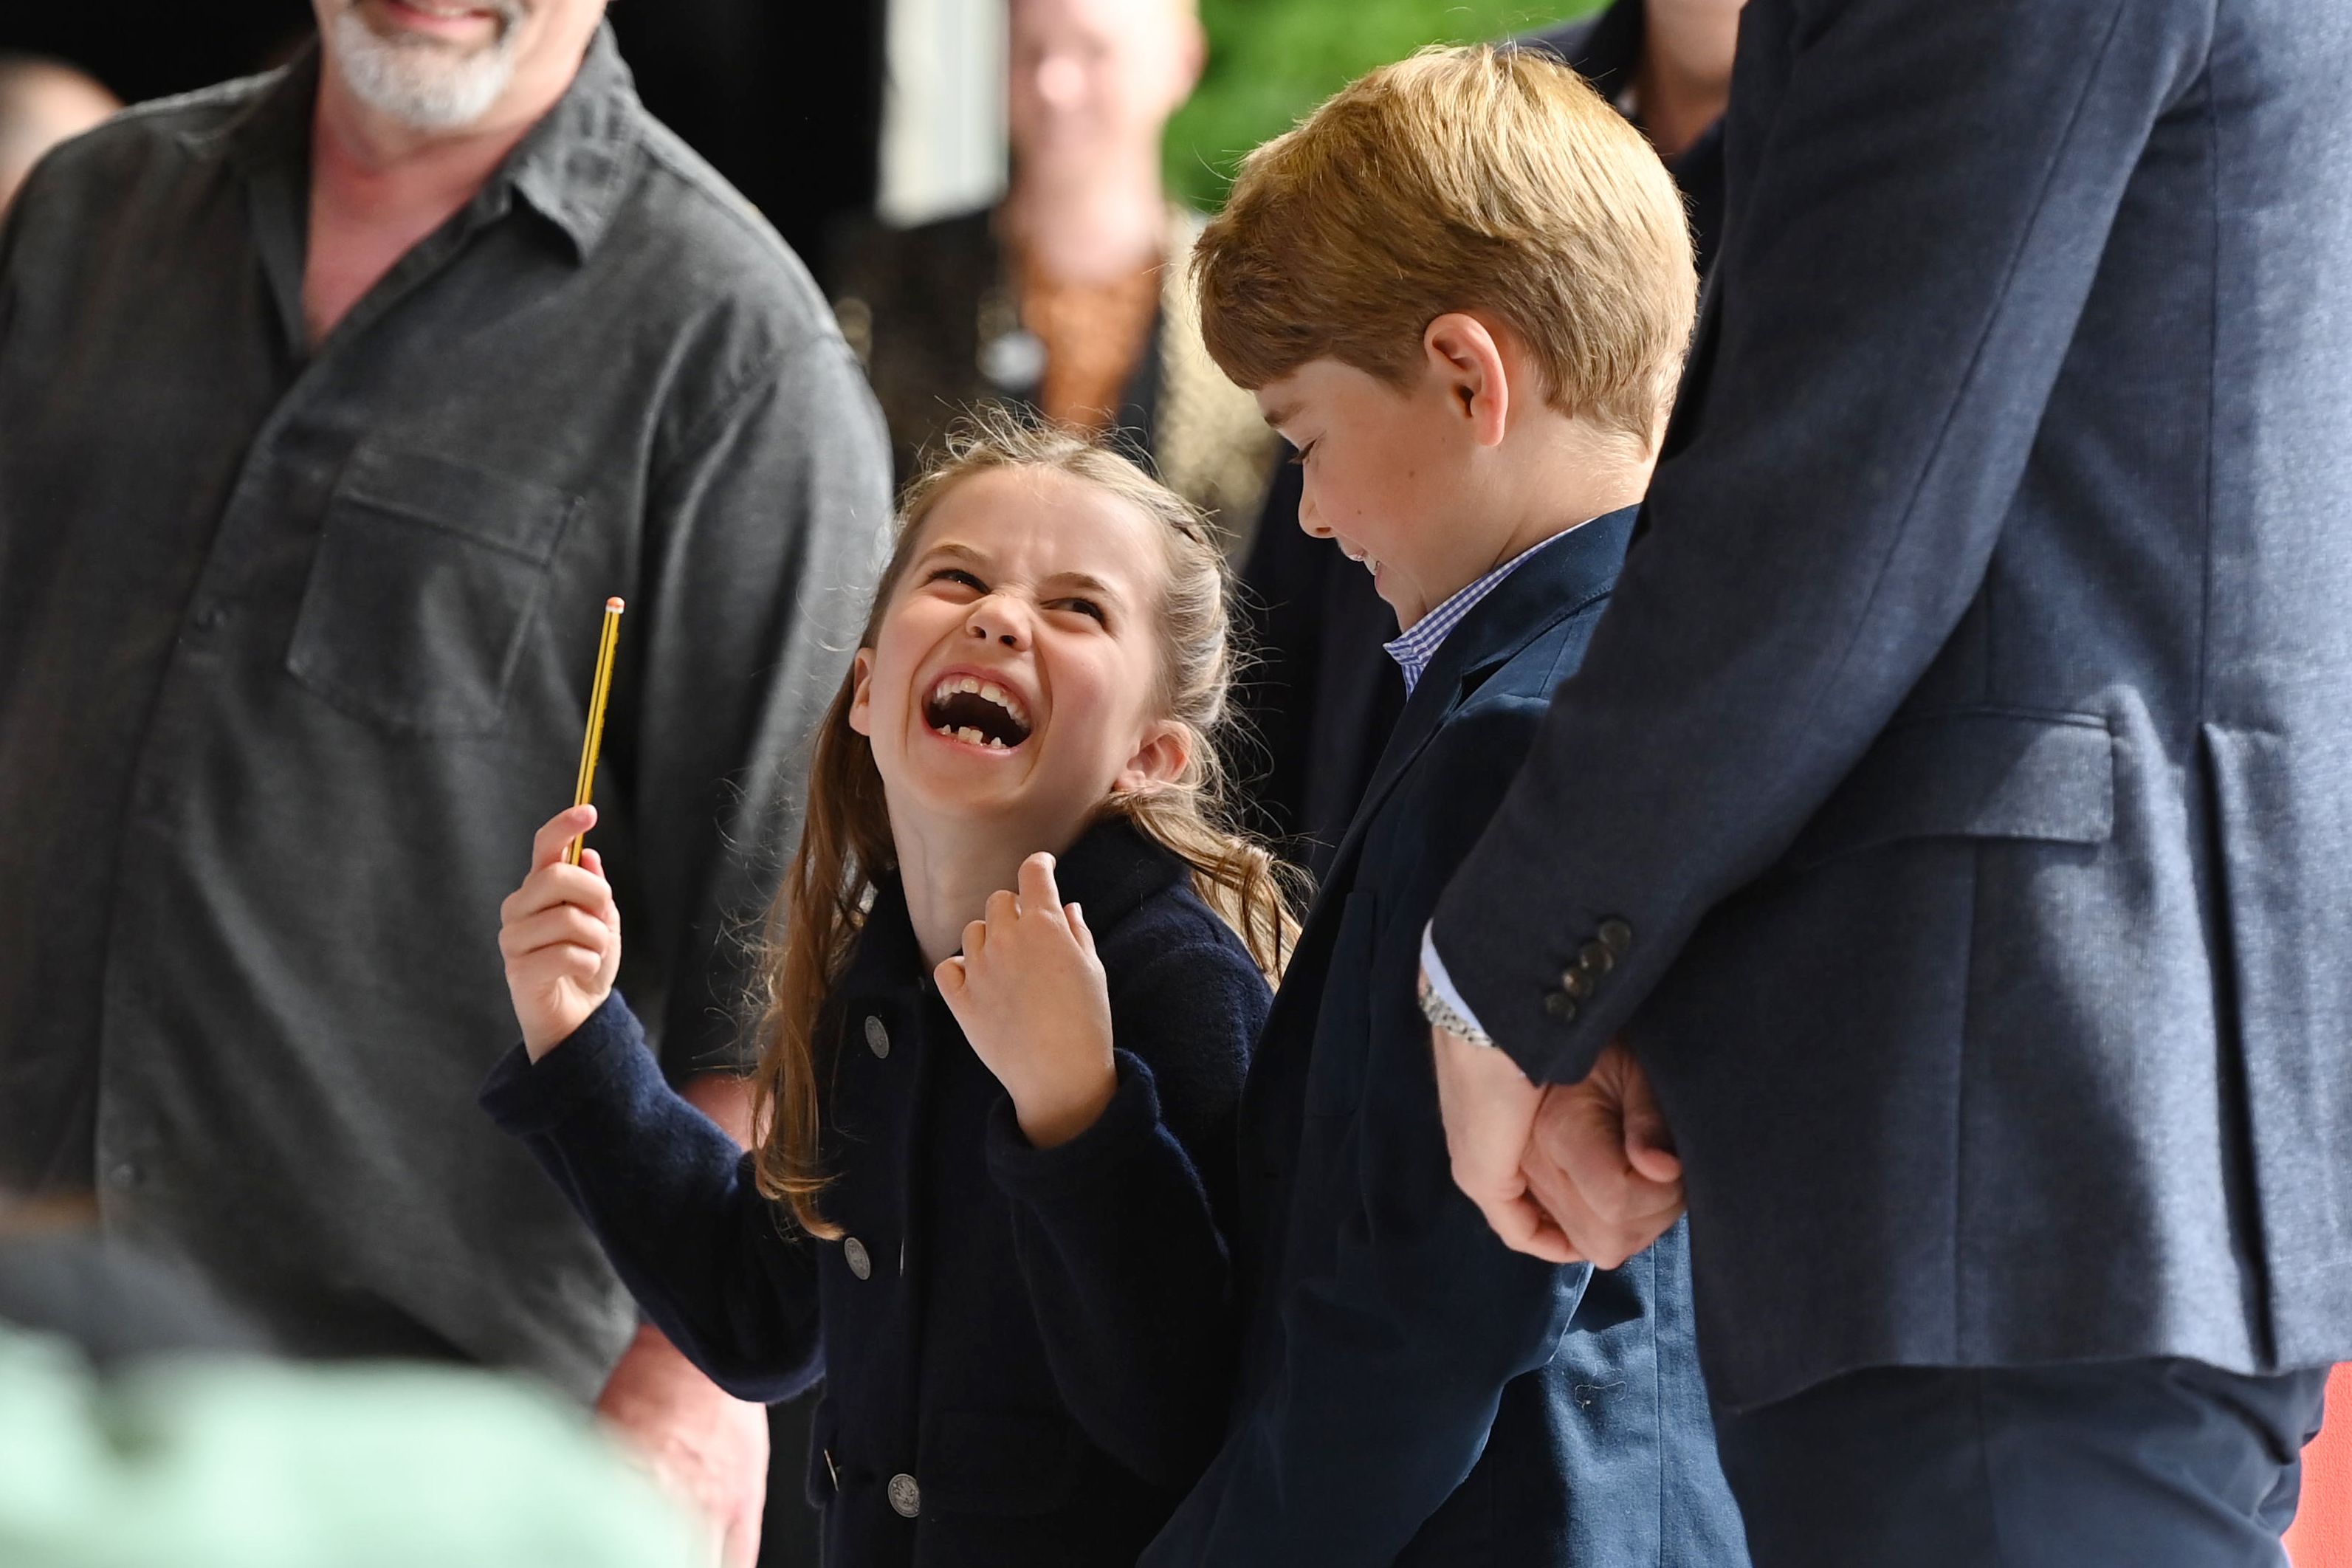 <p>Princess Charlotte laughed as she conducted a band playing "We Don't Talk About Bruno" from Disney's "Encanto" next to brother Prince George during a visit to Cardiff Castle in Wales on June 4, 2022, as part of the royal family's tour for Queen Elizabeth II's <a href="https://www.wonderwall.com/celebrity/royals/platinum-jubilee-see-the-best-photos-from-4-days-of-celebrations-marking-the-queens-70-year-reign-606239.gallery">Platinum Jubilee celebrations</a>.</p>